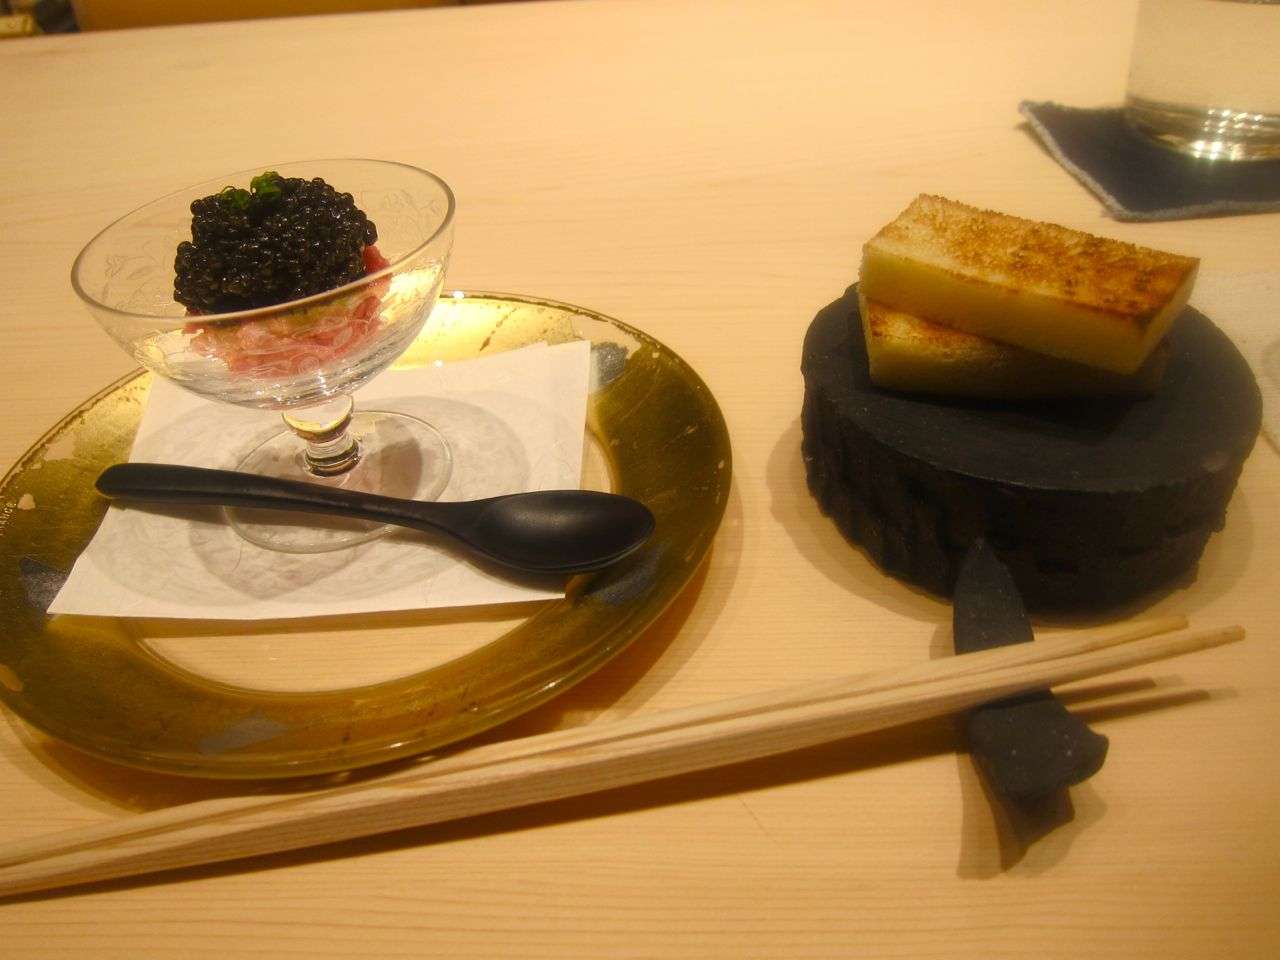 If you have to ask the price, you can’t afford this gossamer fatty toro and caviar.